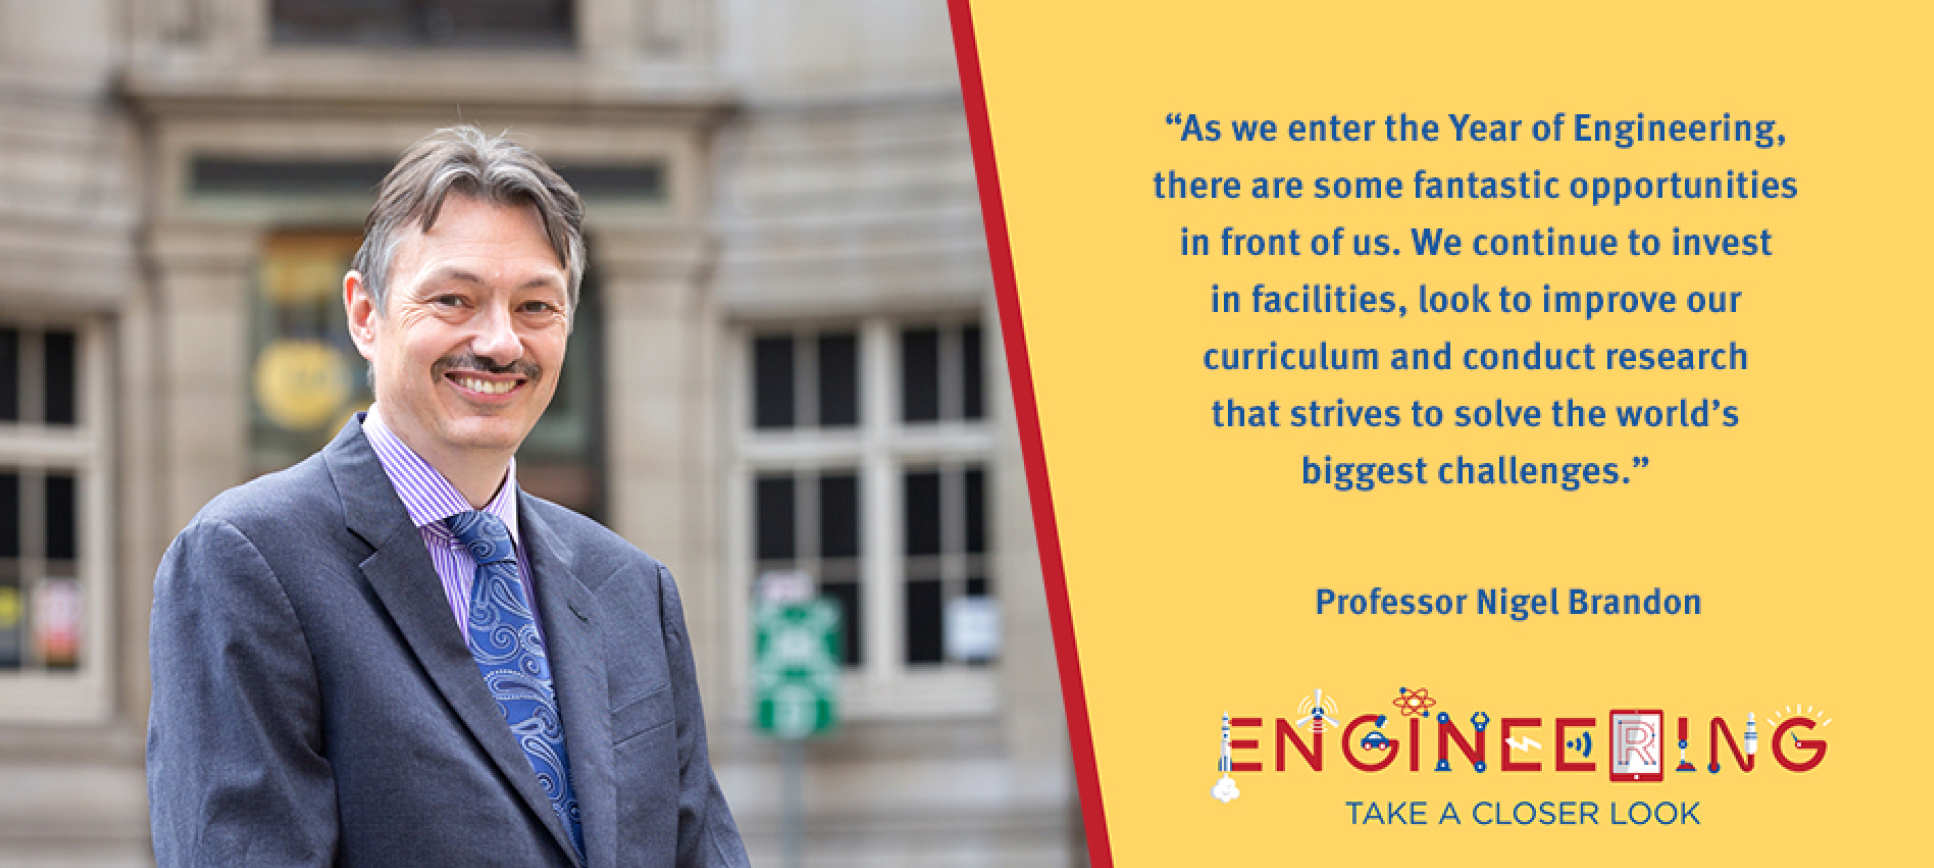 Nigel Brandon: “As we enter the Year of Engineering, there are some fantastic opportunities in front of us. We continue to invest in facilities, look to improve our curriculum and conduct research that strives to solve the world’s biggest challenges.”